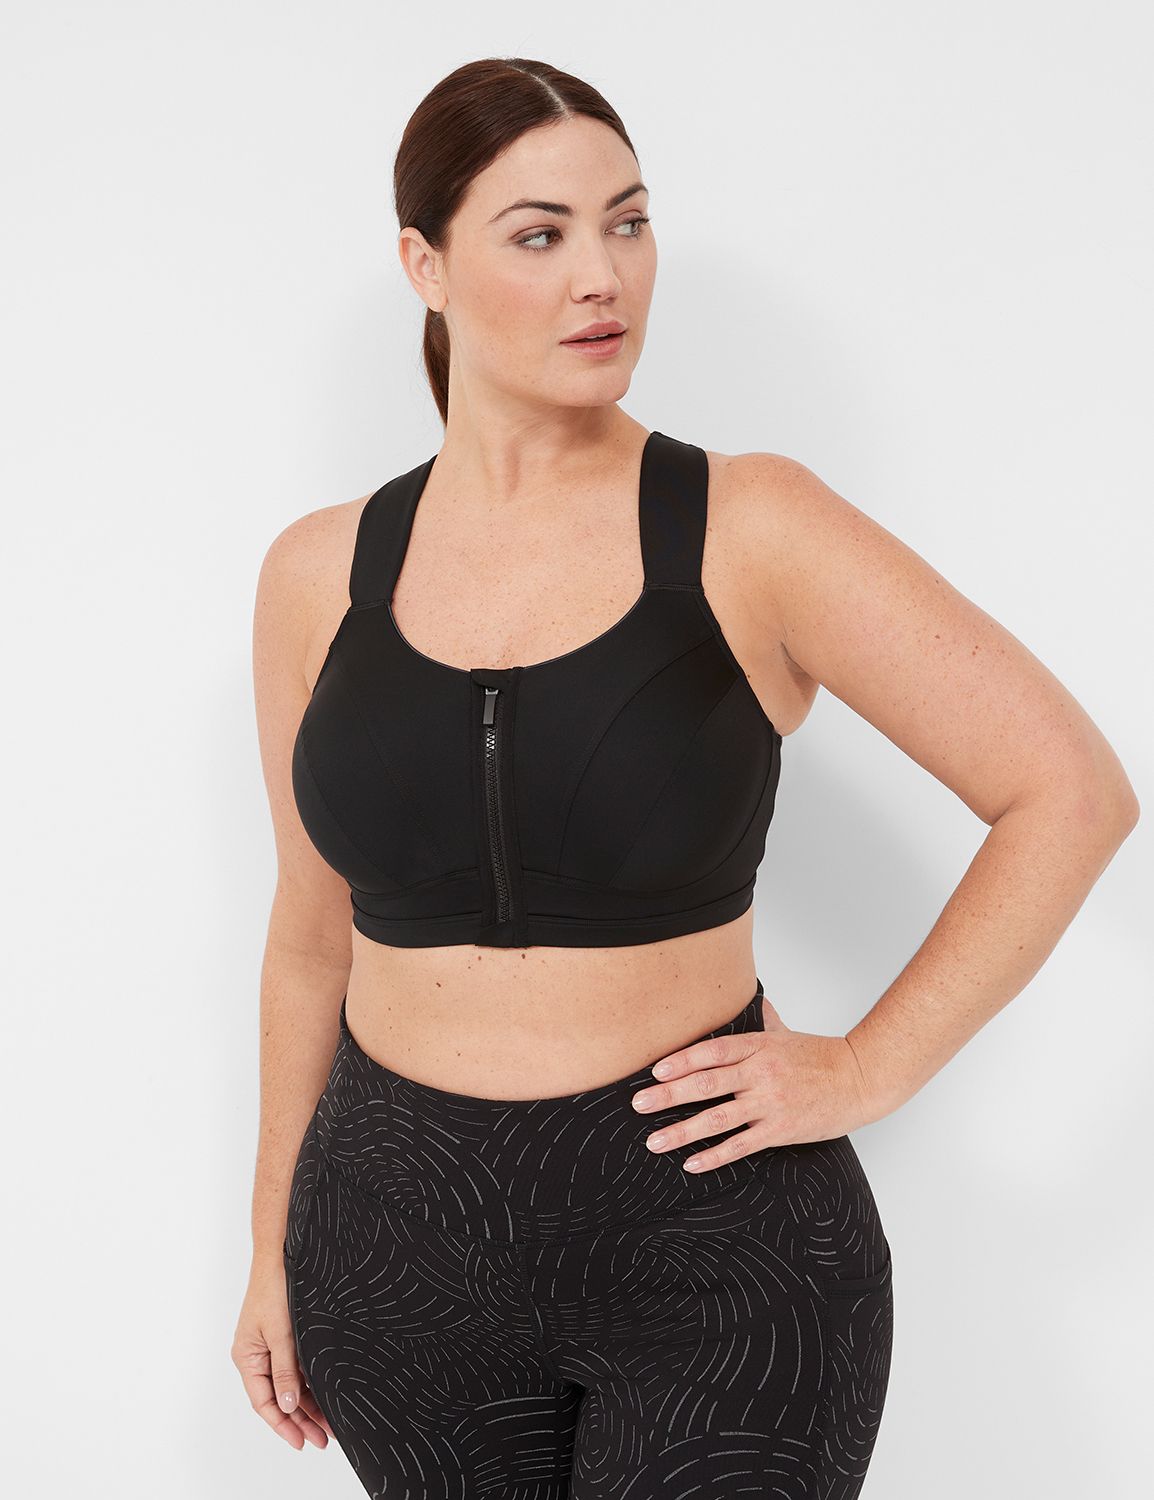 shoppers swear by this top-rated padded sports bra